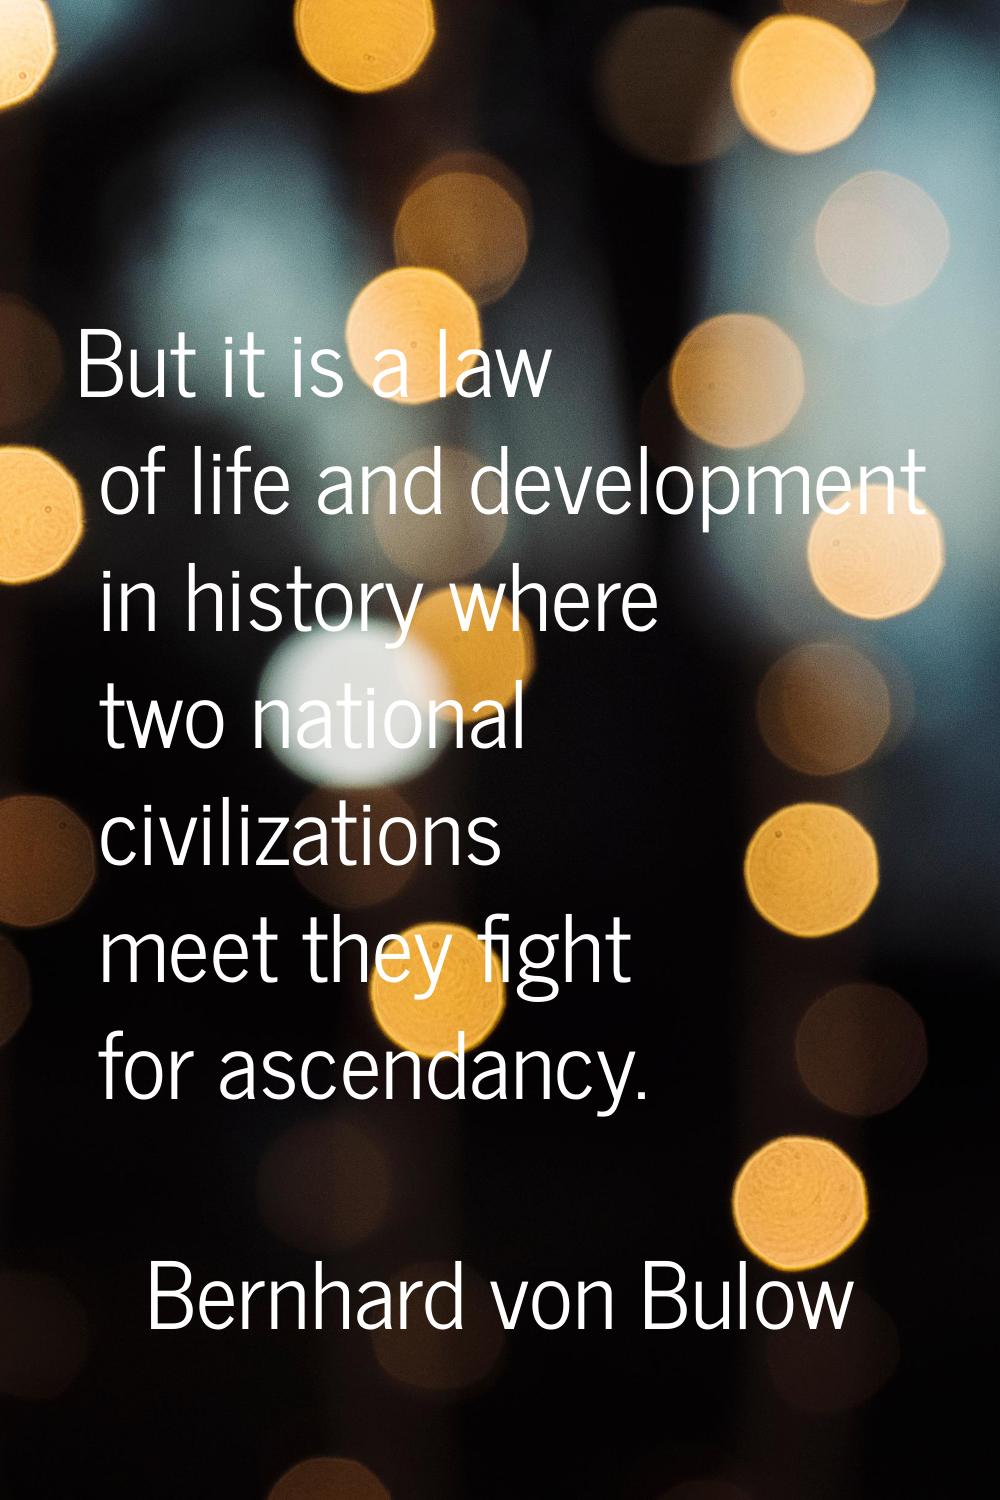 But it is a law of life and development in history where two national civilizations meet they fight